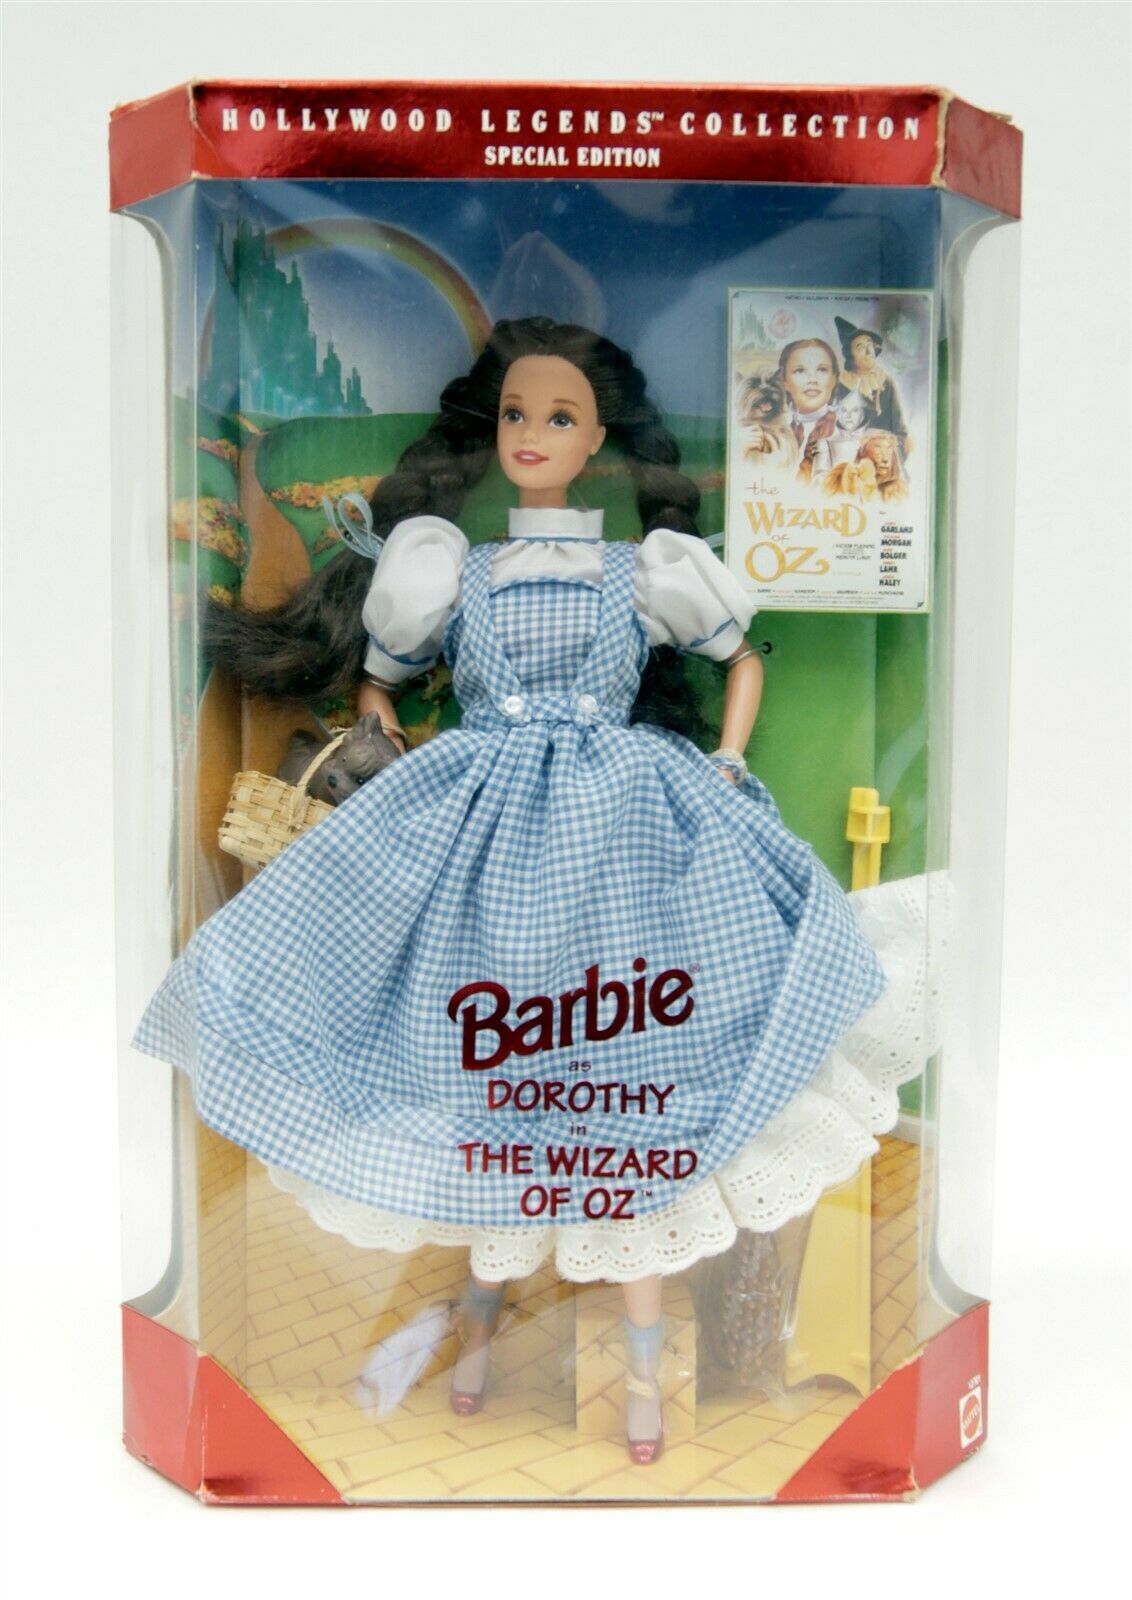 1994 Mattel Hollywoods Legends Barbie As Dorothy In The Wizard Of Oz 12" Doll